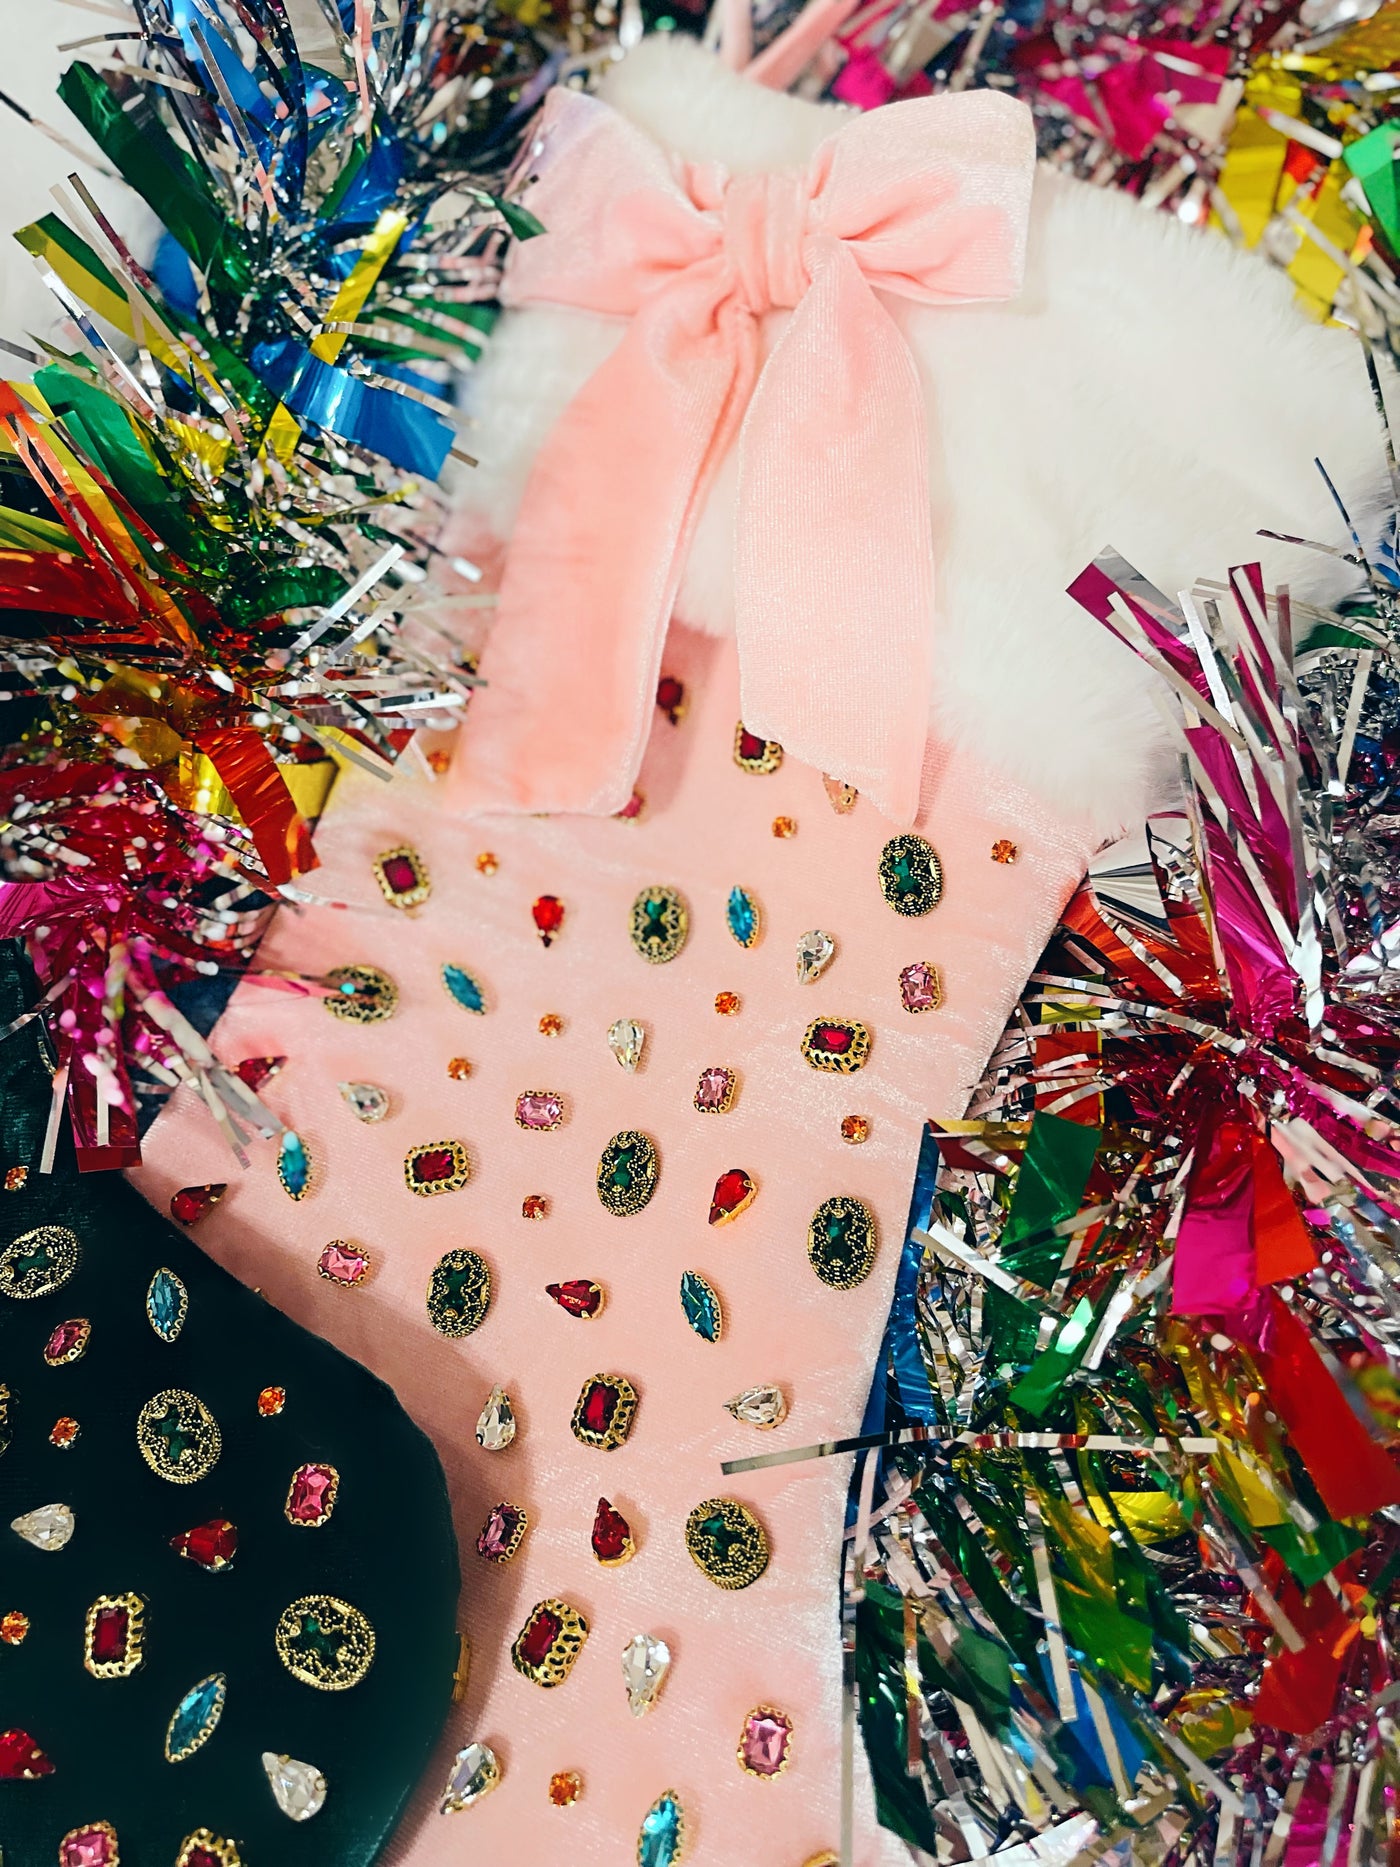 Pink Bejeweled Velvet Christmas Stocking with Bow